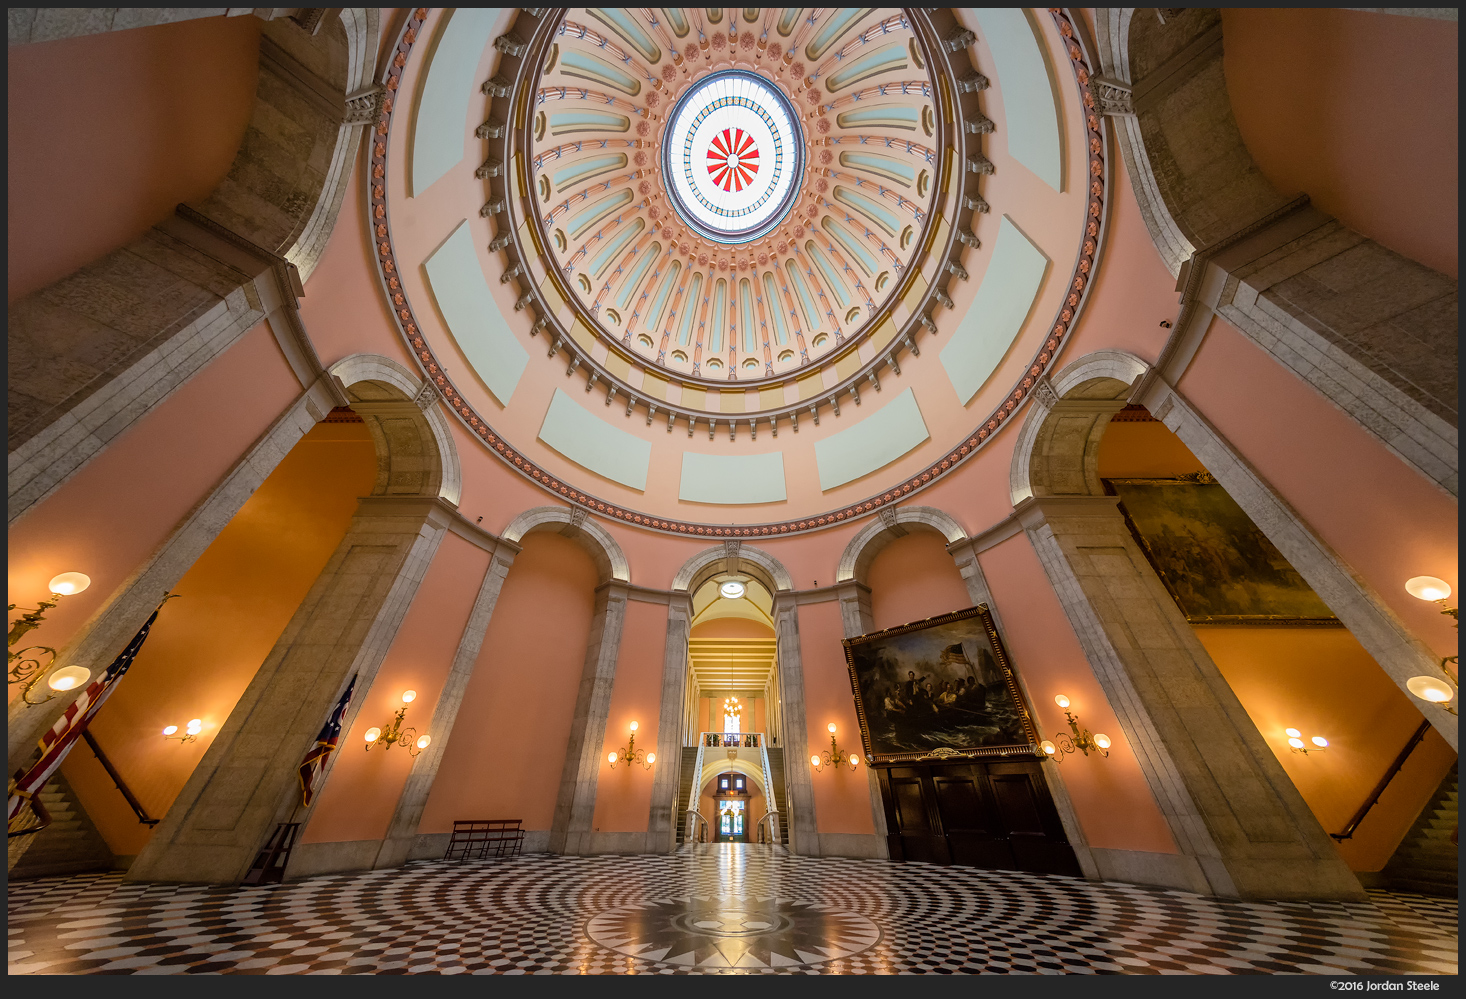 You can incorporate the perspective distortion into the composision, as I did in this shot. Ohio Statehoute rotunda - Sony A7 II with Voigtländer 10mm f/5.6 @ f/8